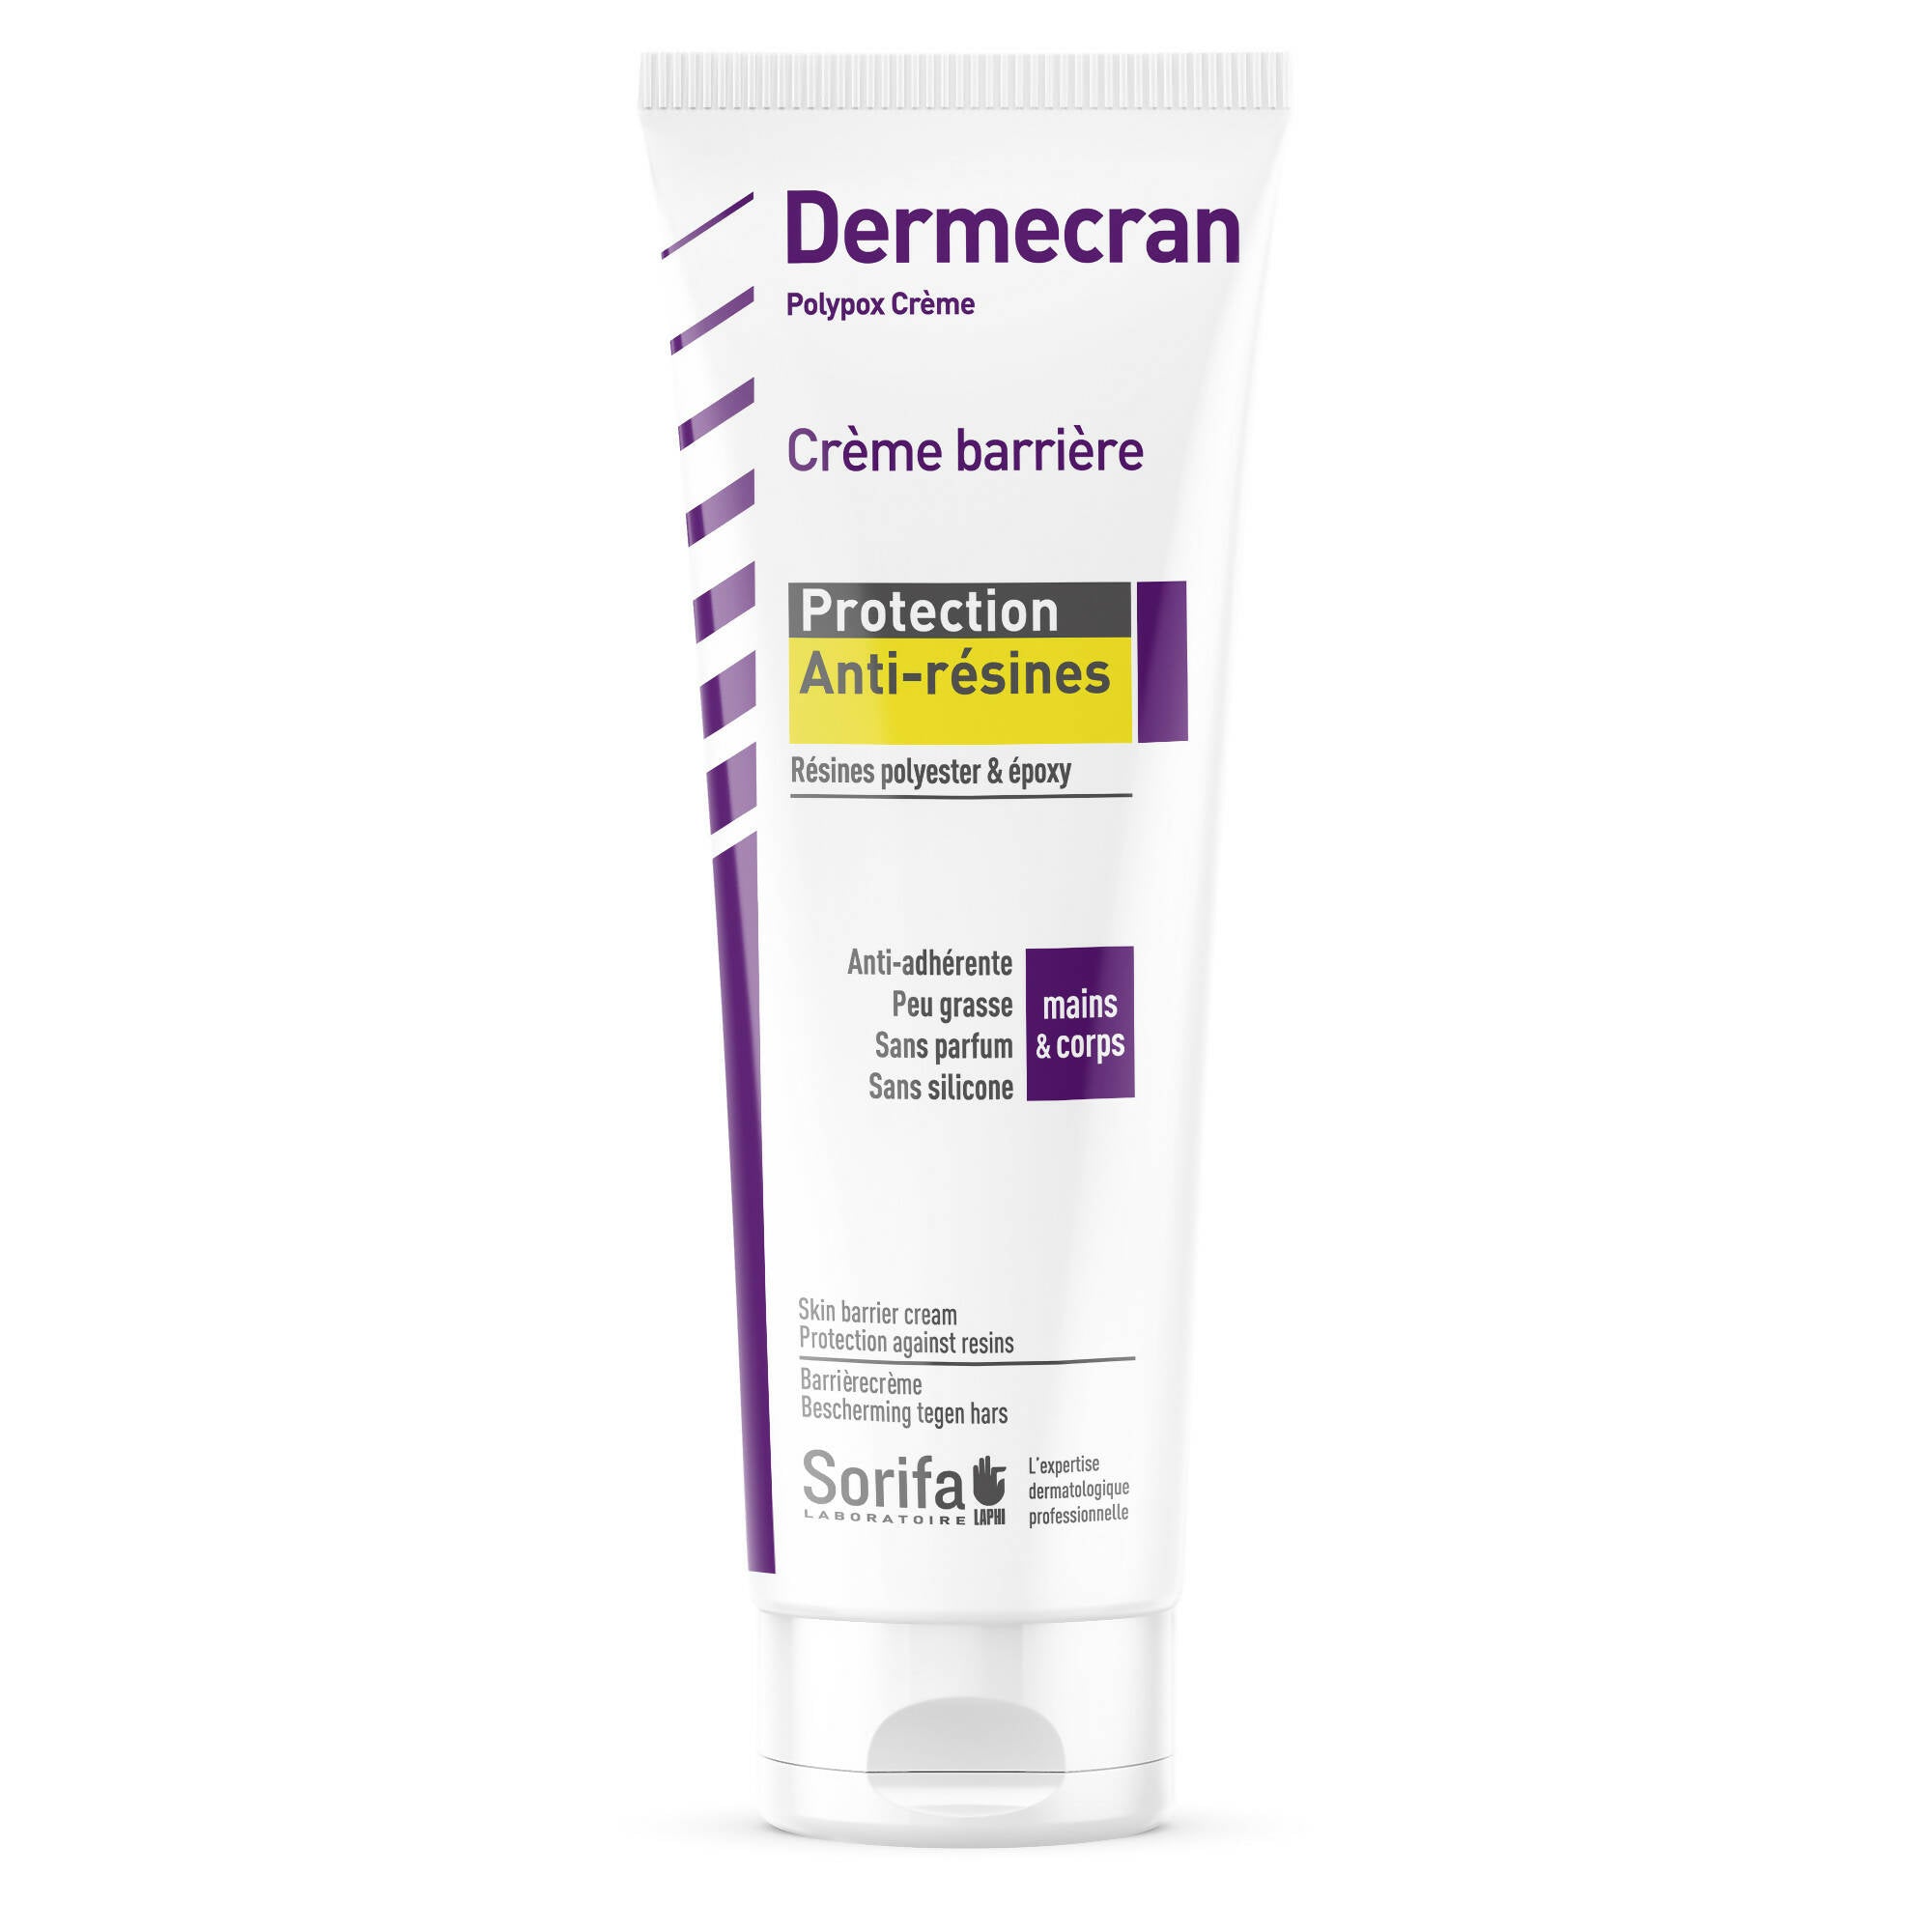 SORIFA - Complete box of 24 - Dermscreen - Barrier cream - ANTI-RESIN / Polypox protection - POLYESTER - EPOXY - Hands and body - High tolerance - 125 ml tube. - 0